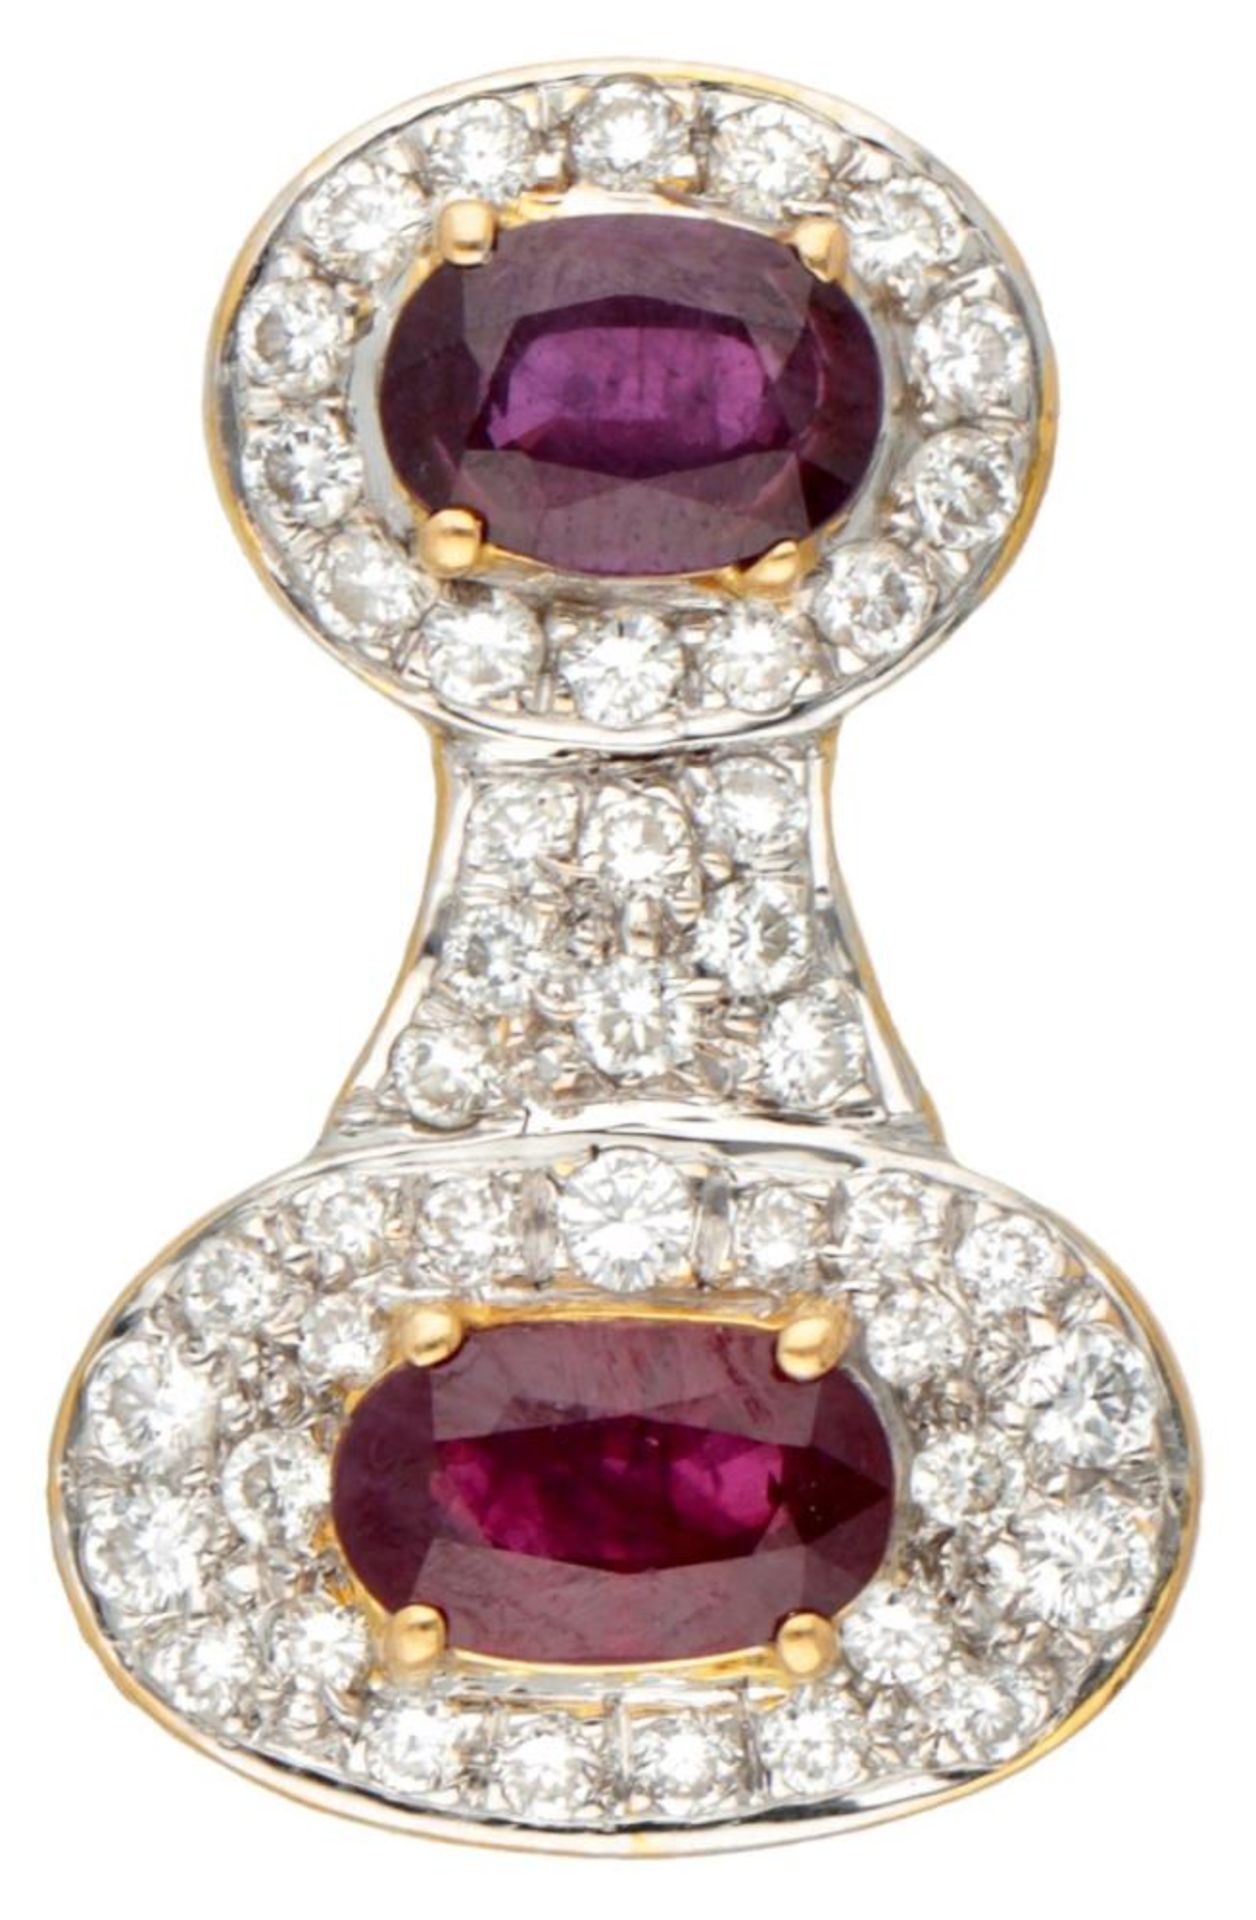 18K. Bicolor gold vintage pendant set with approx. 0.90 ct. diamond and approx. 1.91 ct. ruby.